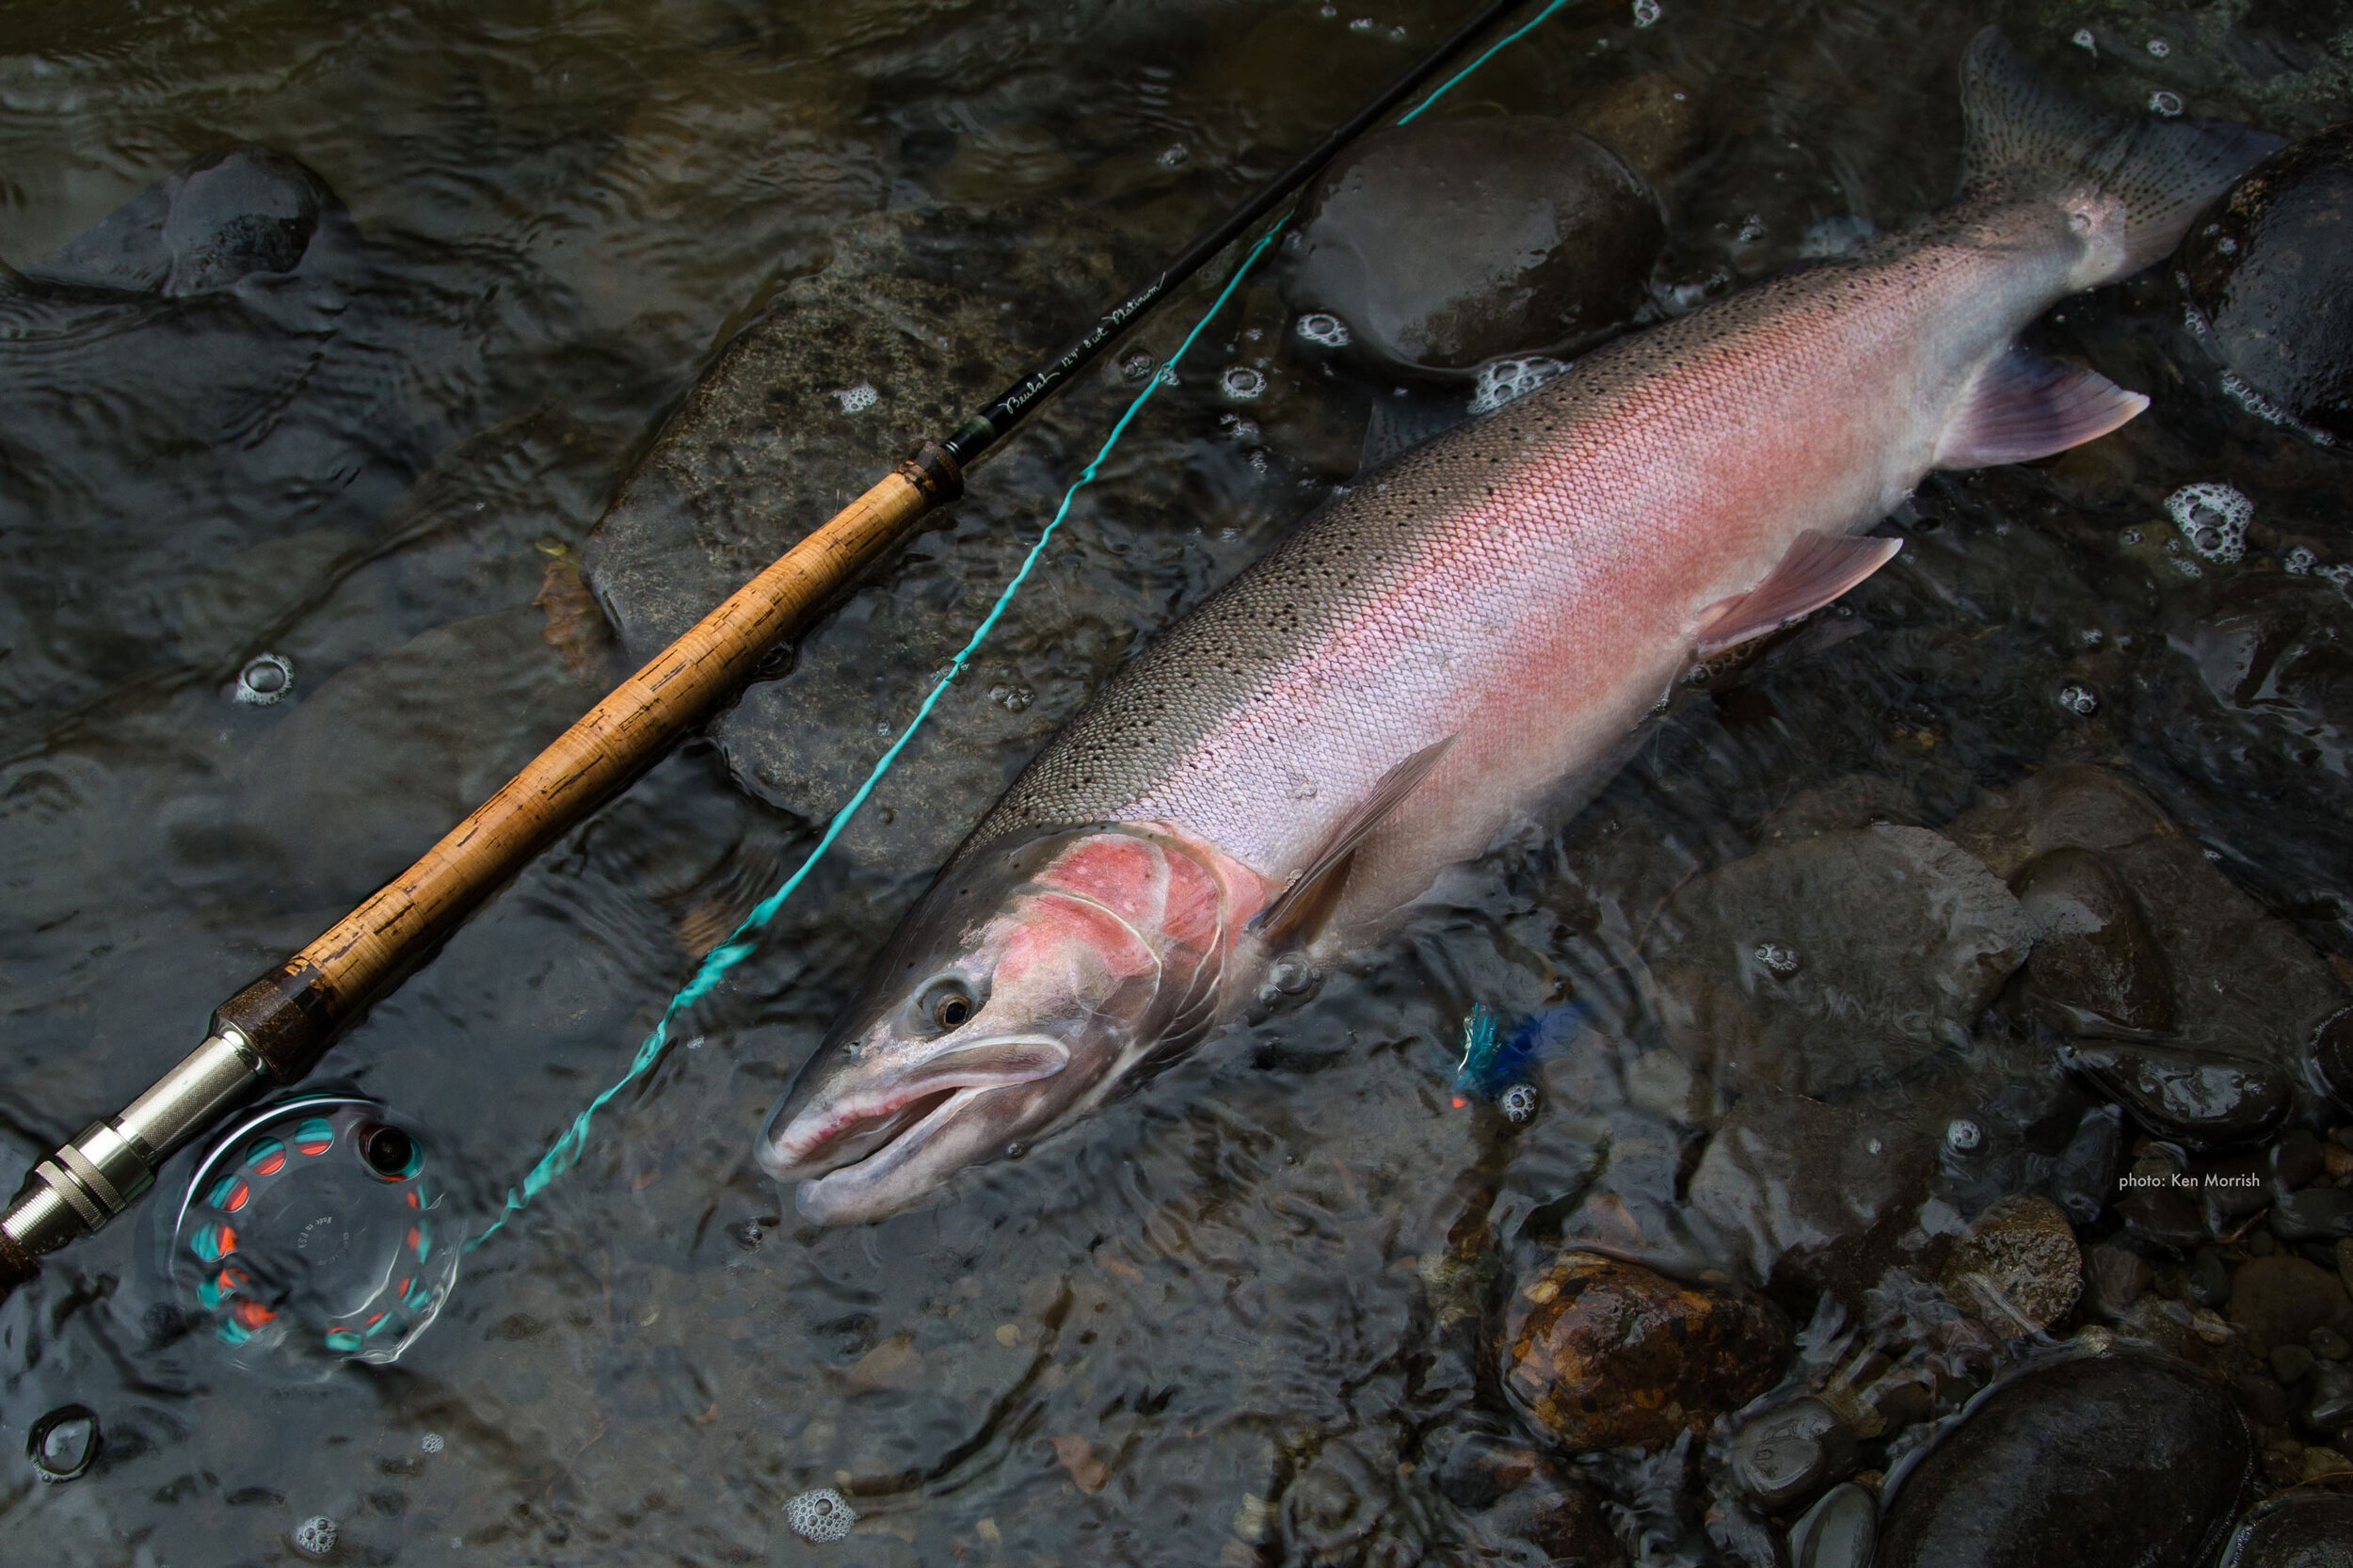  dedicated to   THE PRESERVATION OF THE WORLD’S WILDEST STEELHEAD RIVER    LEARN MORE  